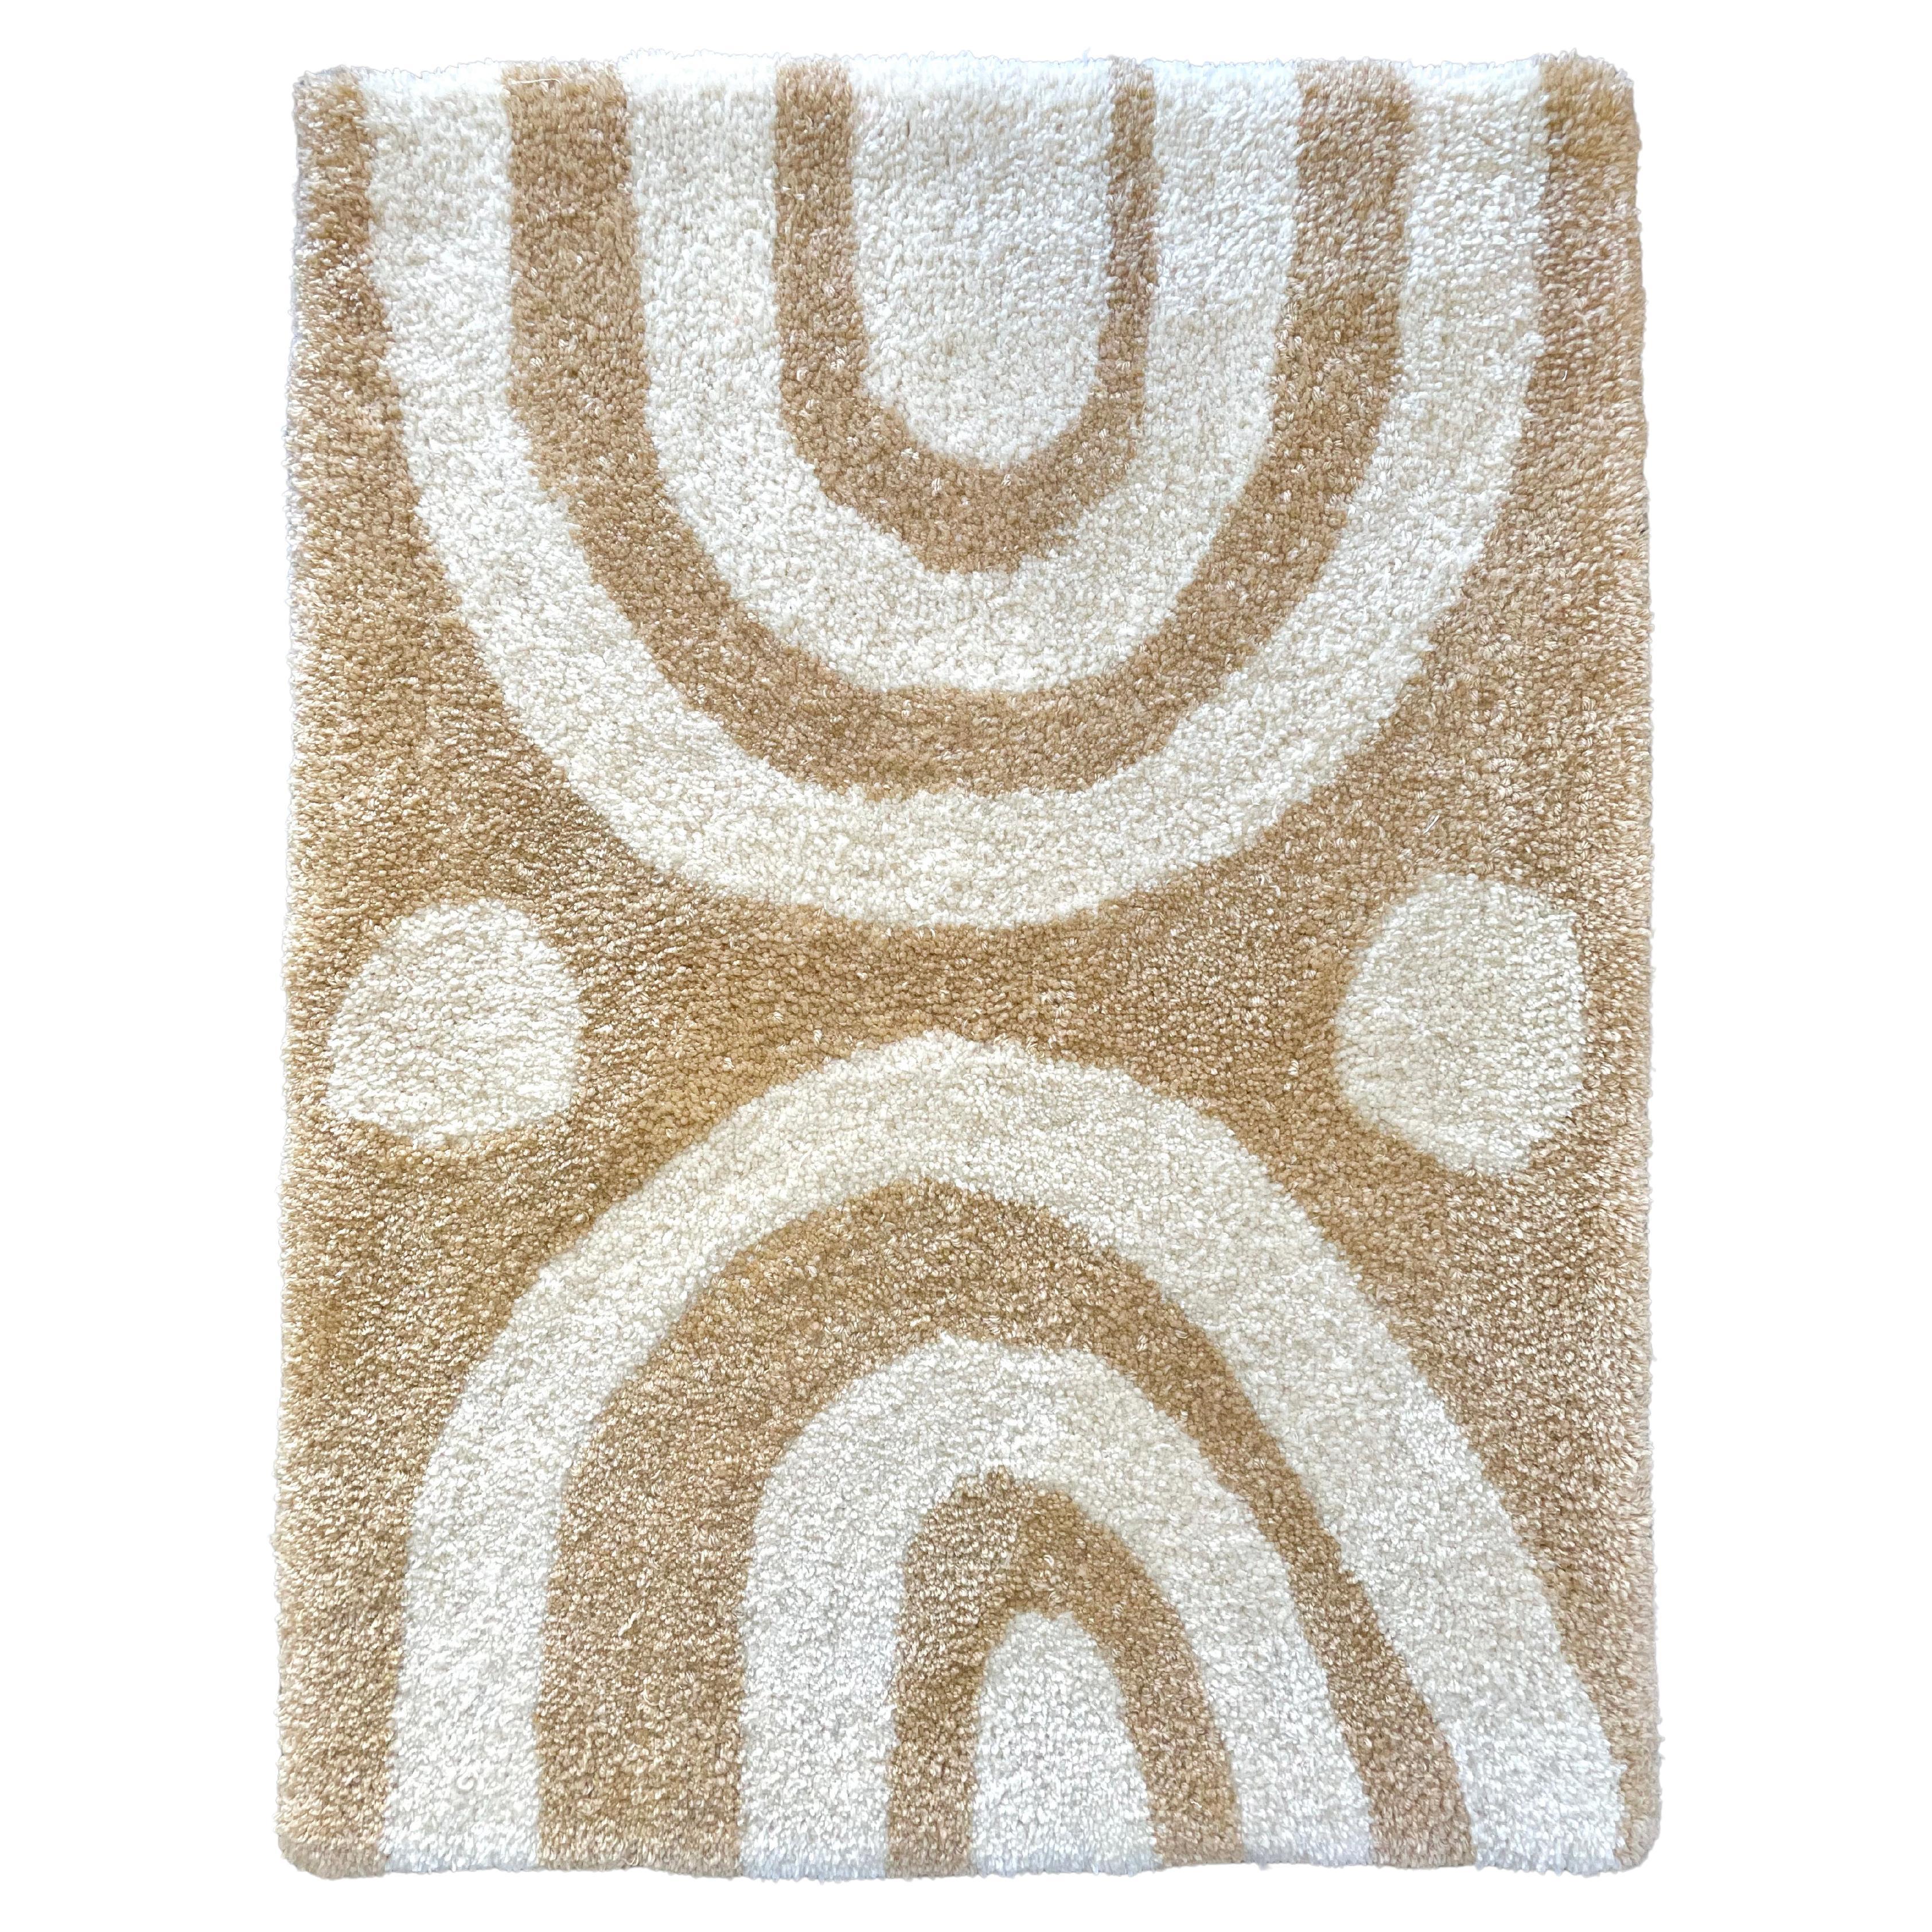 Double Arches Neutral Beige and Cream Rainbow Area Rug For Sale